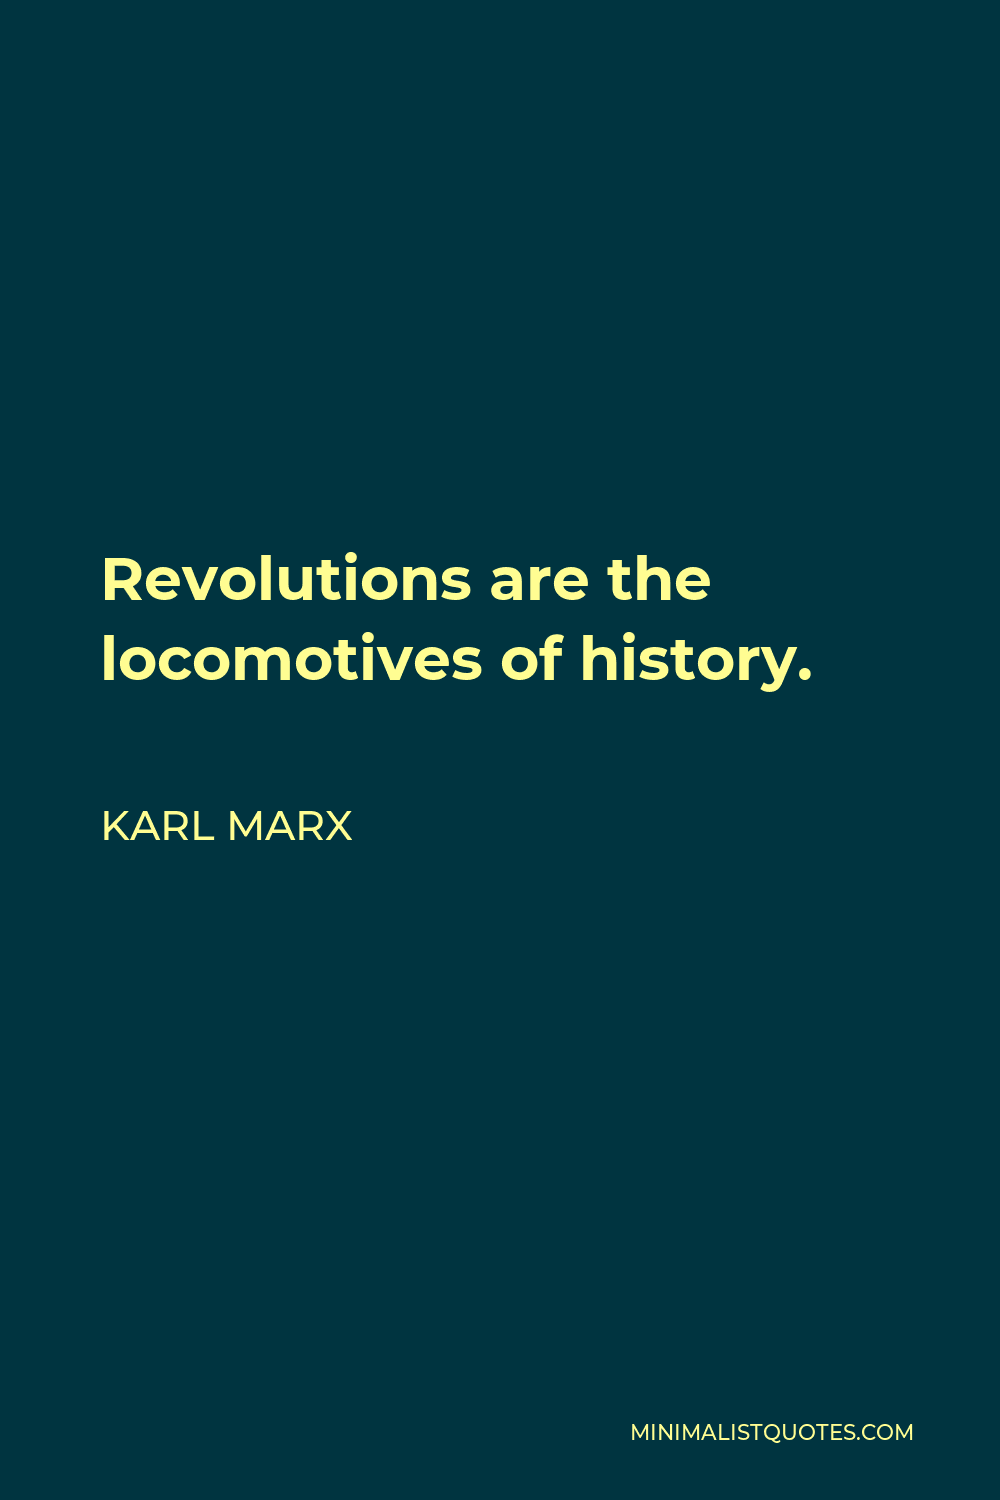 Karl Marx Quote - Revolutions are the locomotives of history.